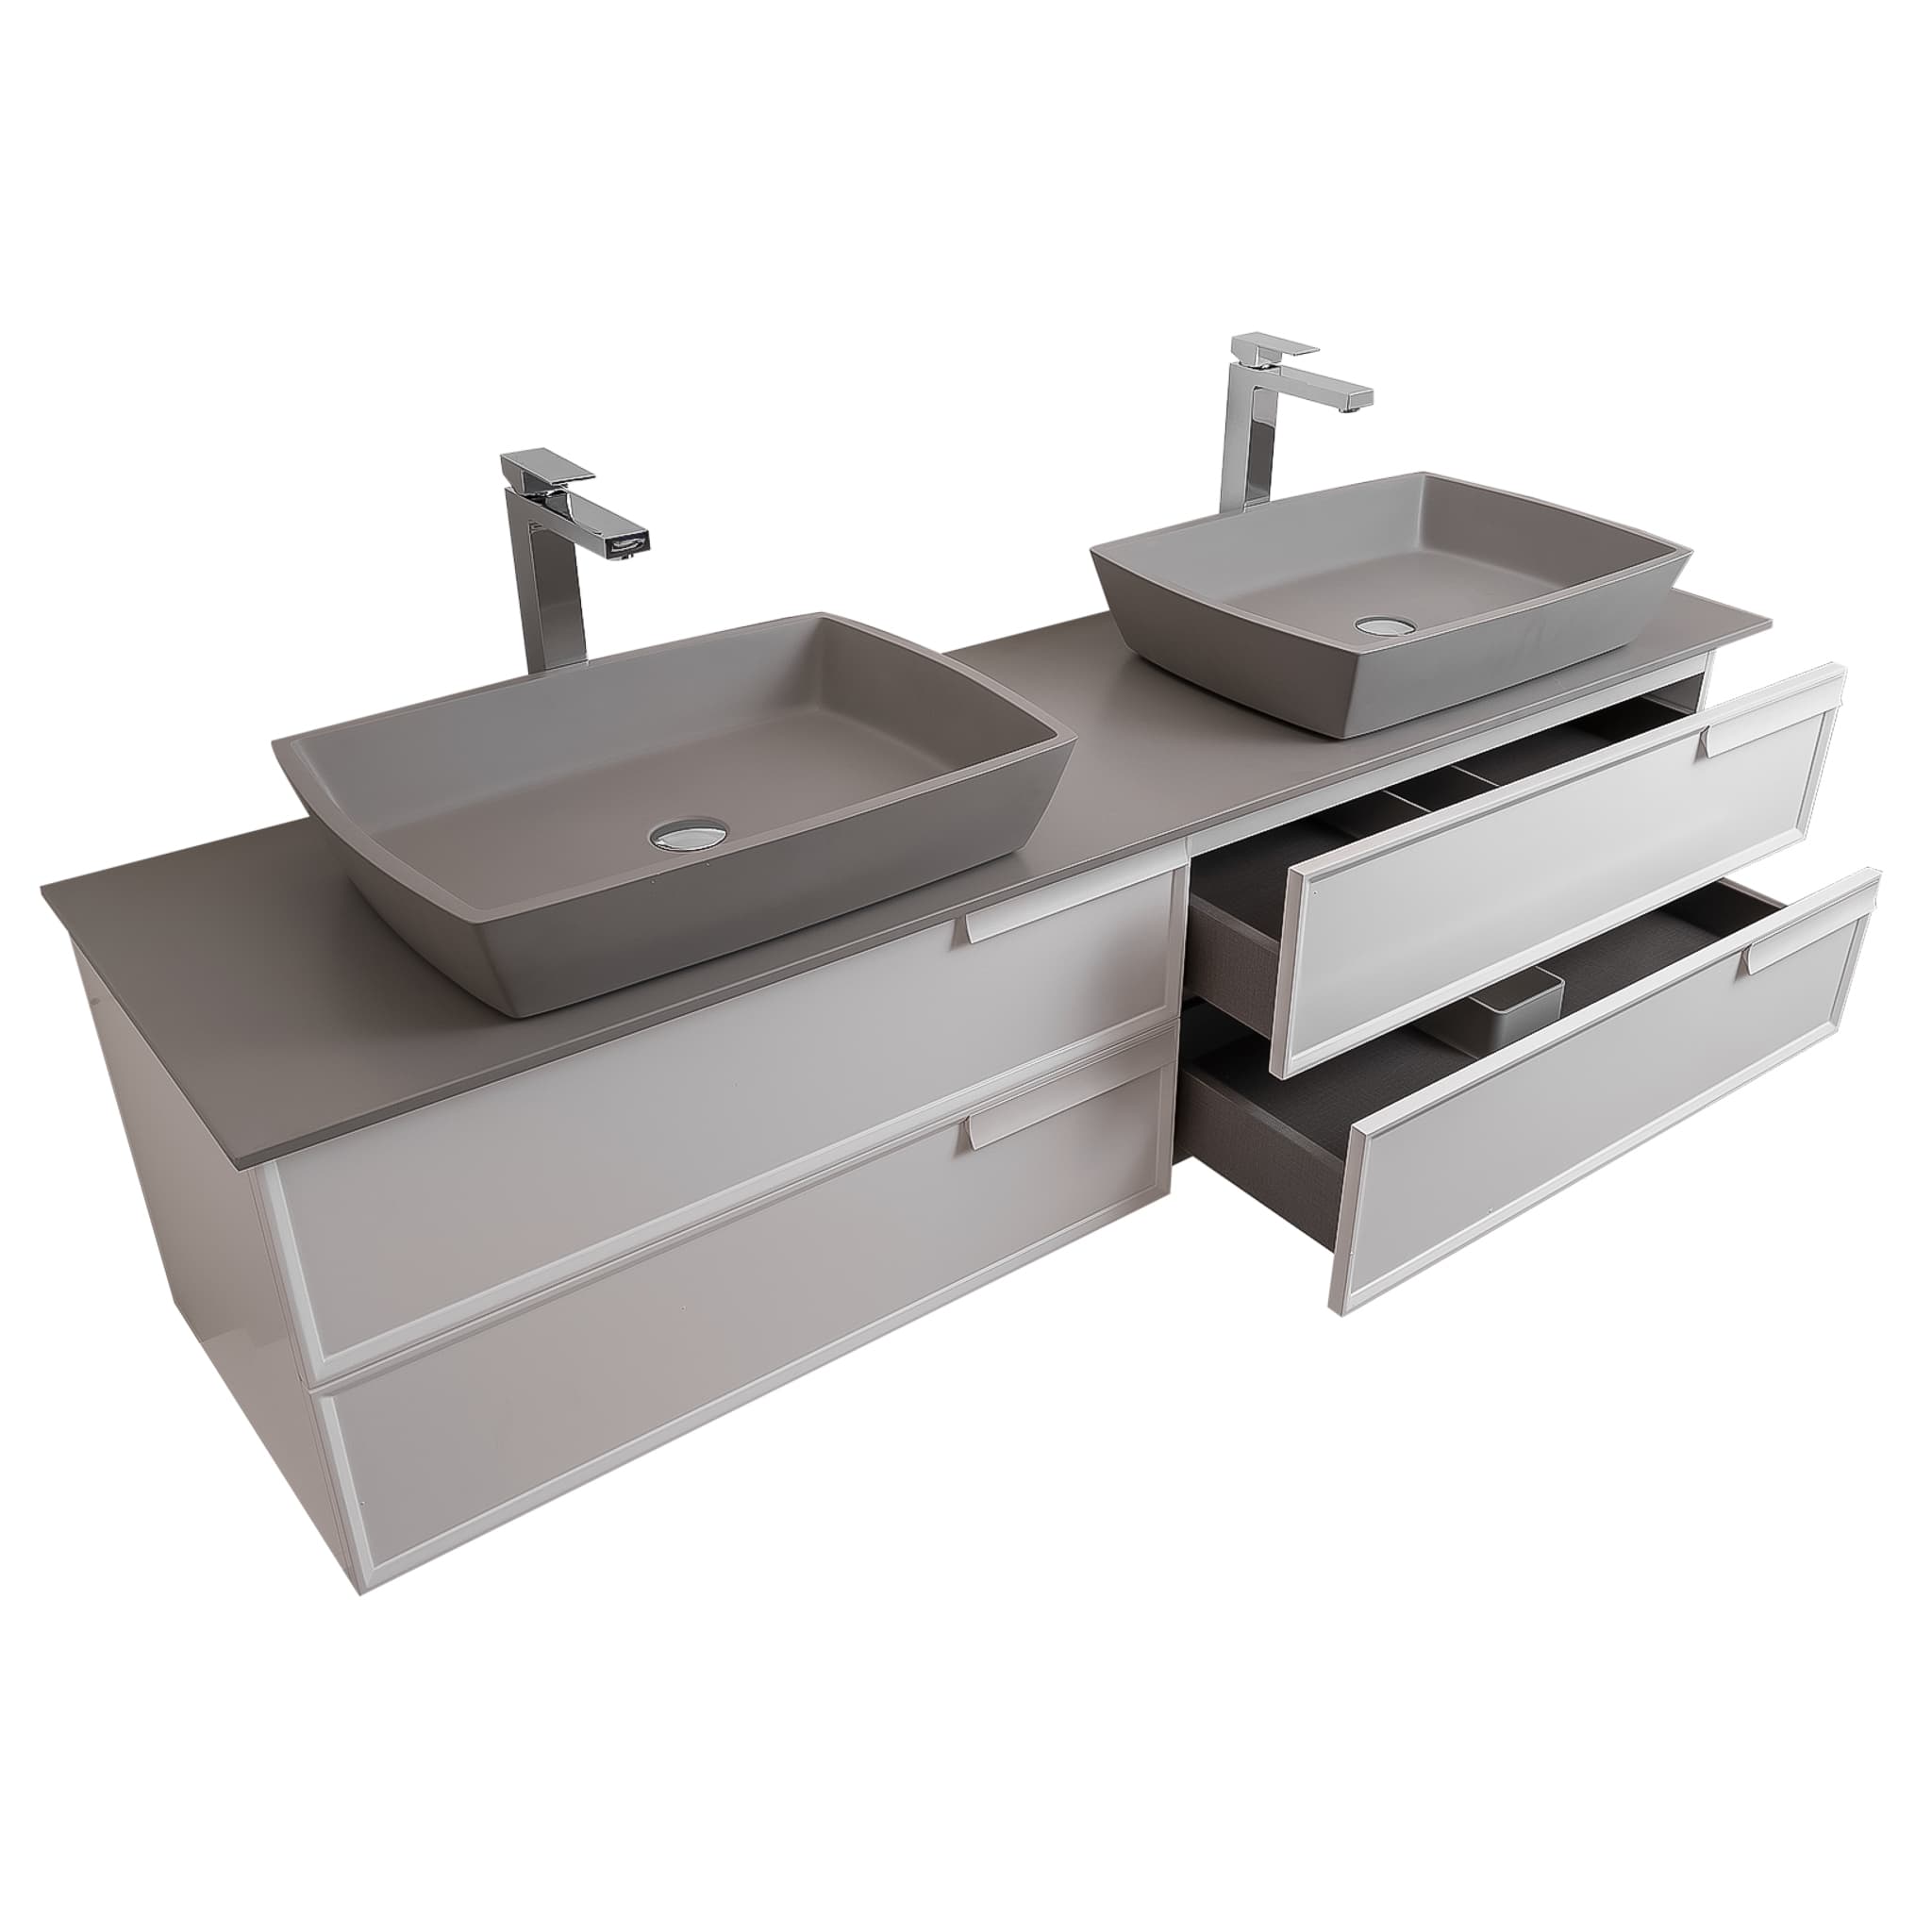 Garda 72 Matte White Cabinet, Solid Surface Flat Grey Counter and Two Square Solid Surface Grey Basin 1316, Wall Mounted Modern Vanity Set